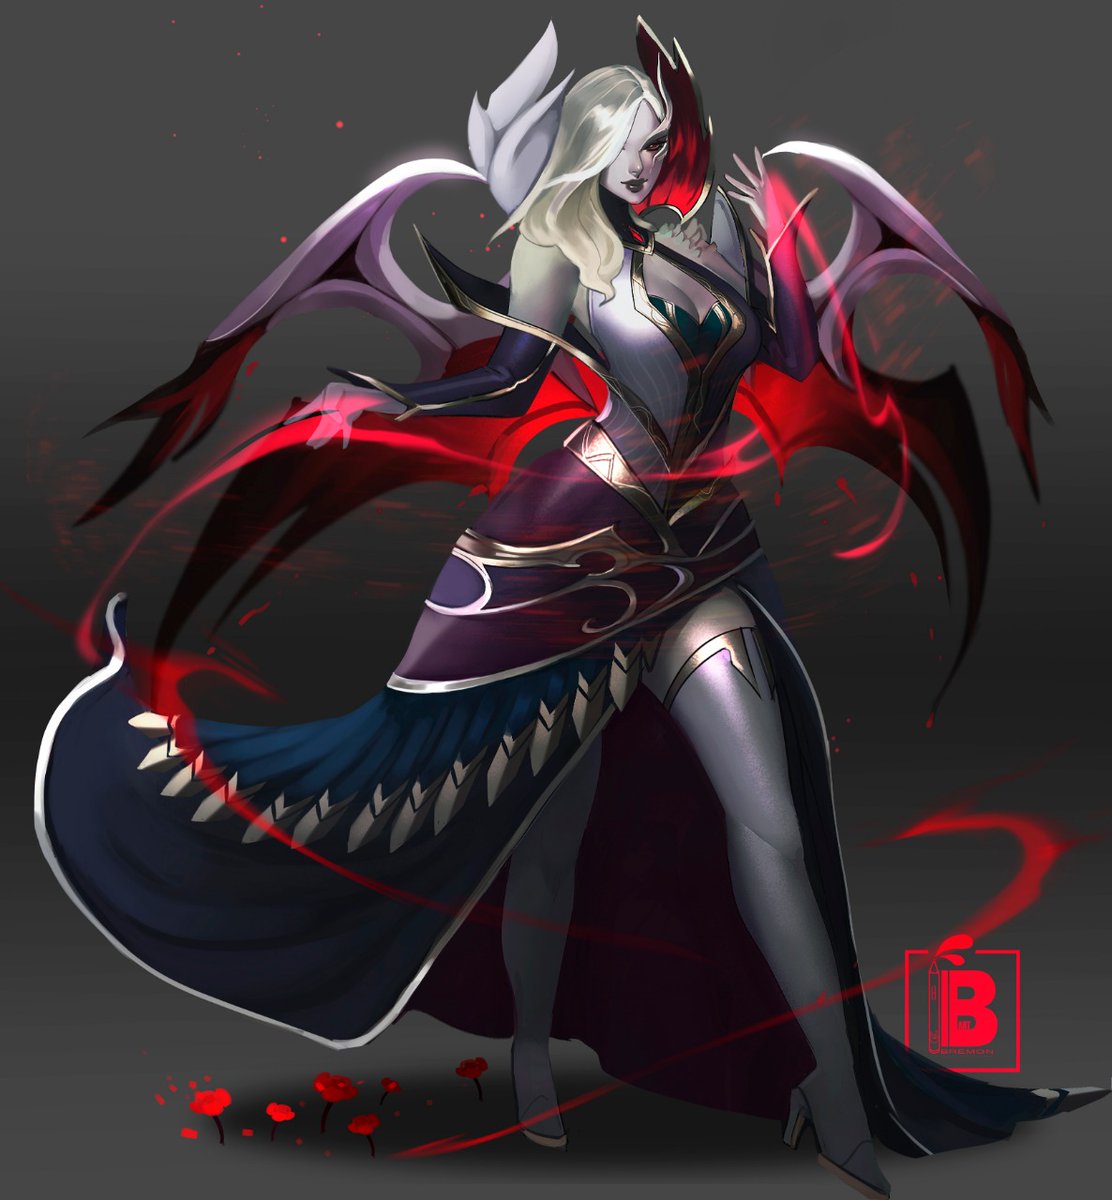 Bremon Coven Morgana Fan Art Who S Morgana Main I Made A Fan Art Of Her With Her Awesome New Skin 3 Morgana Leagueoflegends Leagueoflegendsfanart Fanart Art Digitalart Photoshop T Co N2llgnqnvv